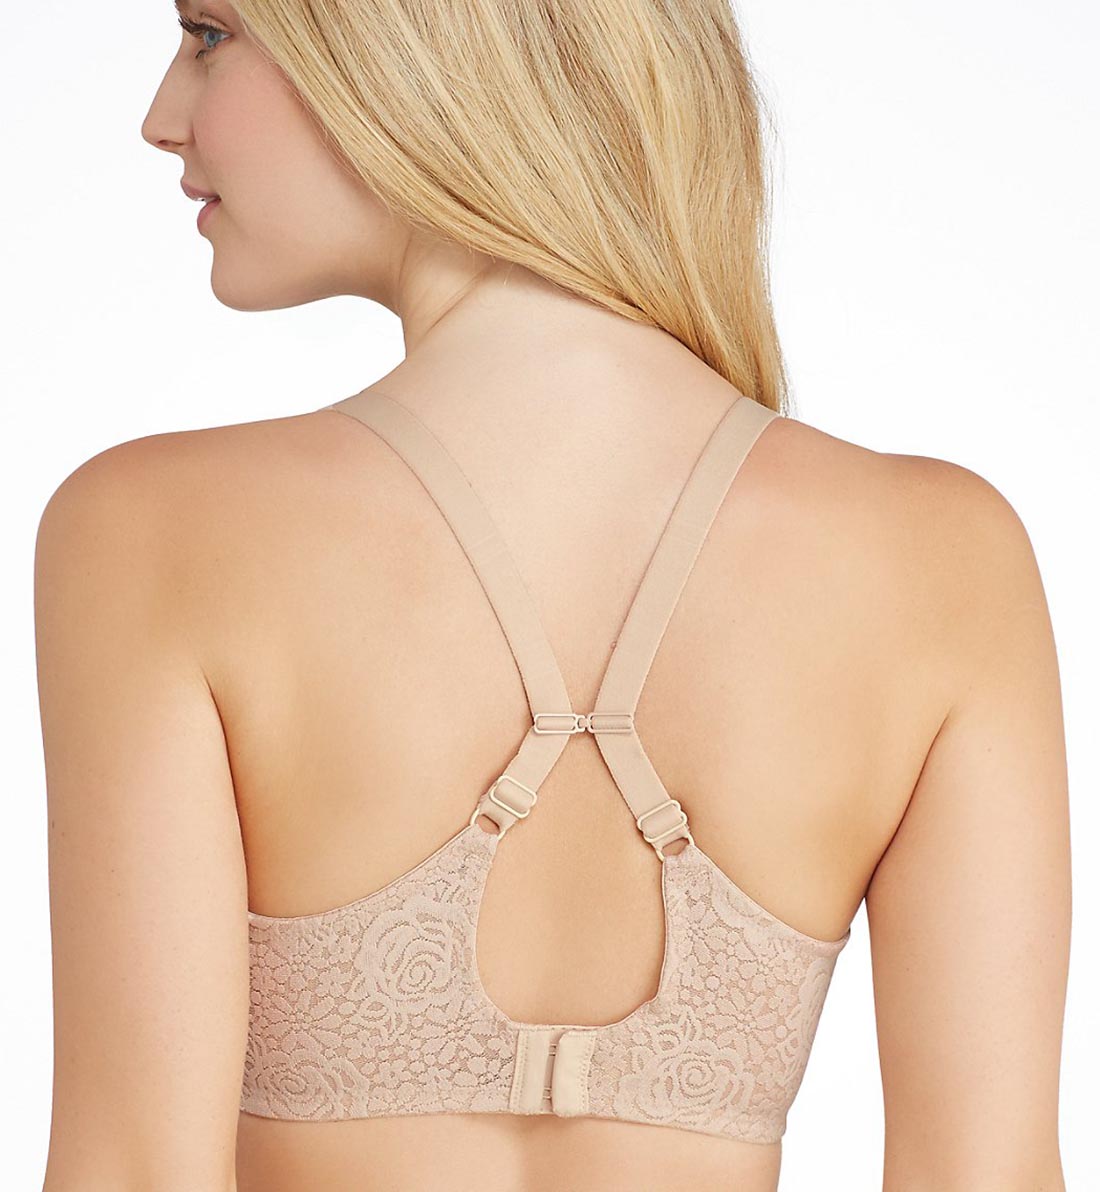 Embrace Lace Naturally Nude / Ivory Contour Bra from Wacoal